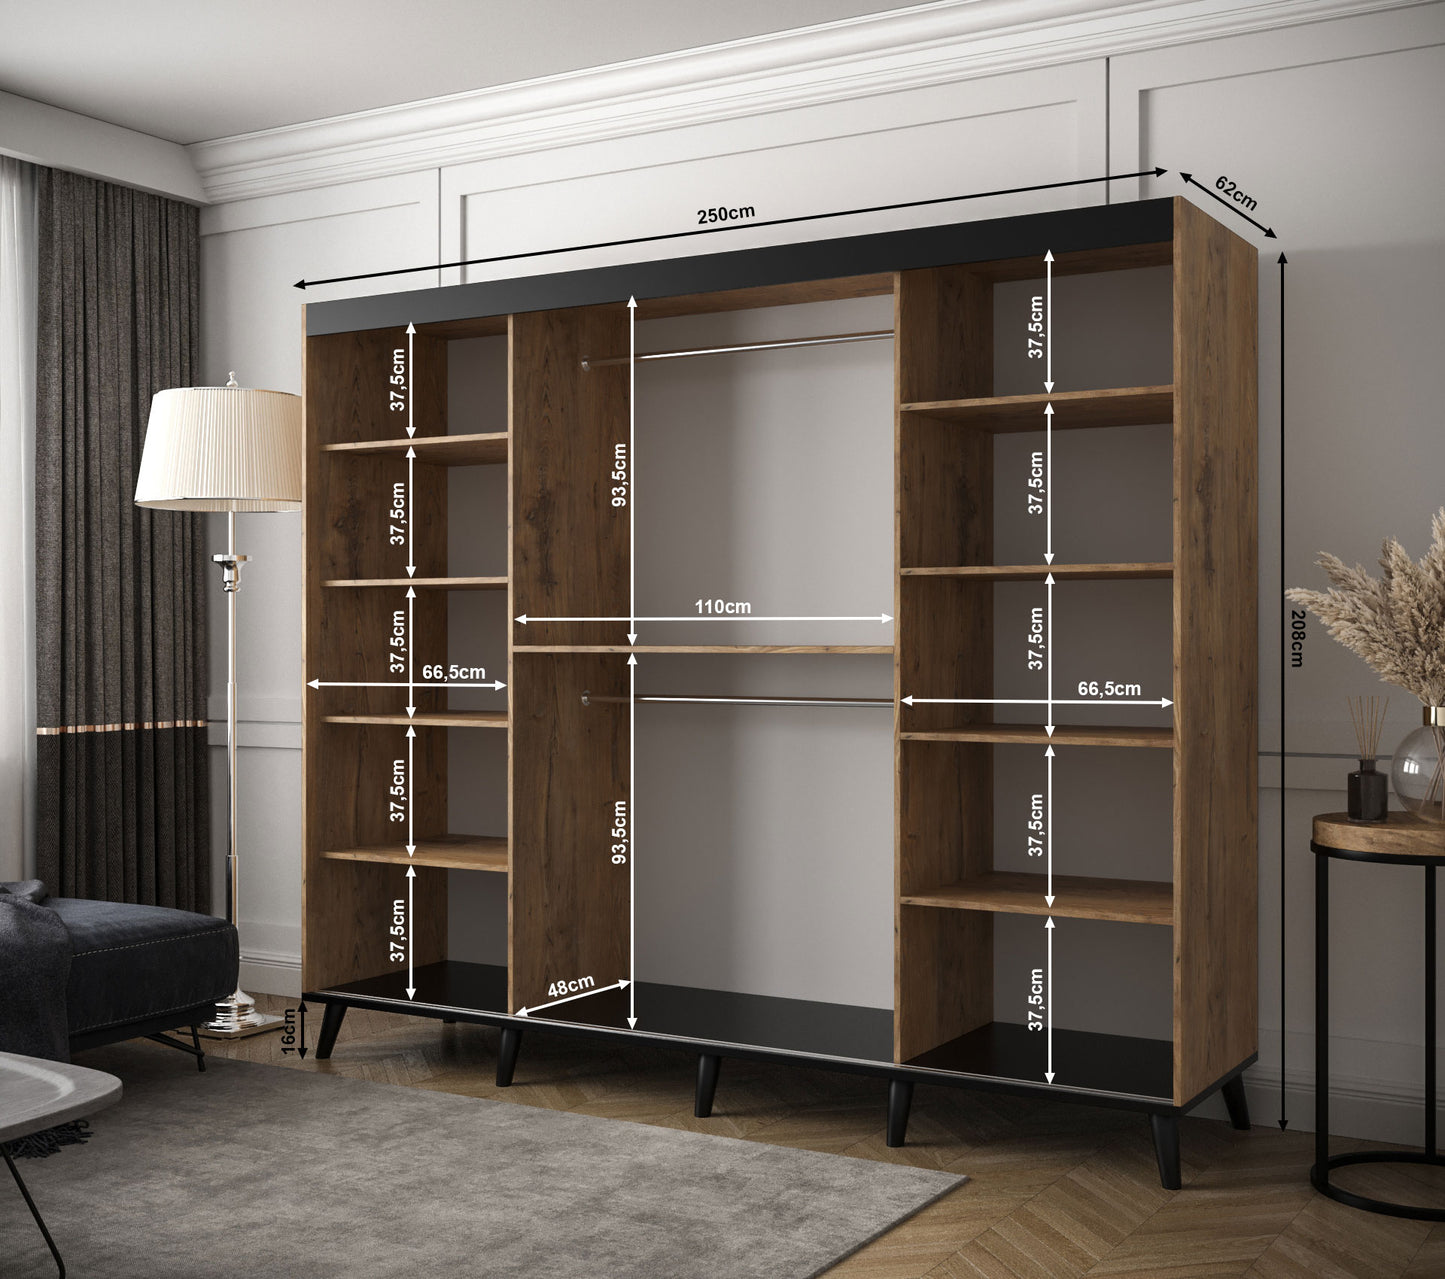 Galicia T3 - Industrial Style Wardrobe Mirrors Shelves Drawers Optional ASSEMBLY INCLUDED >250 cm x 208 cm<